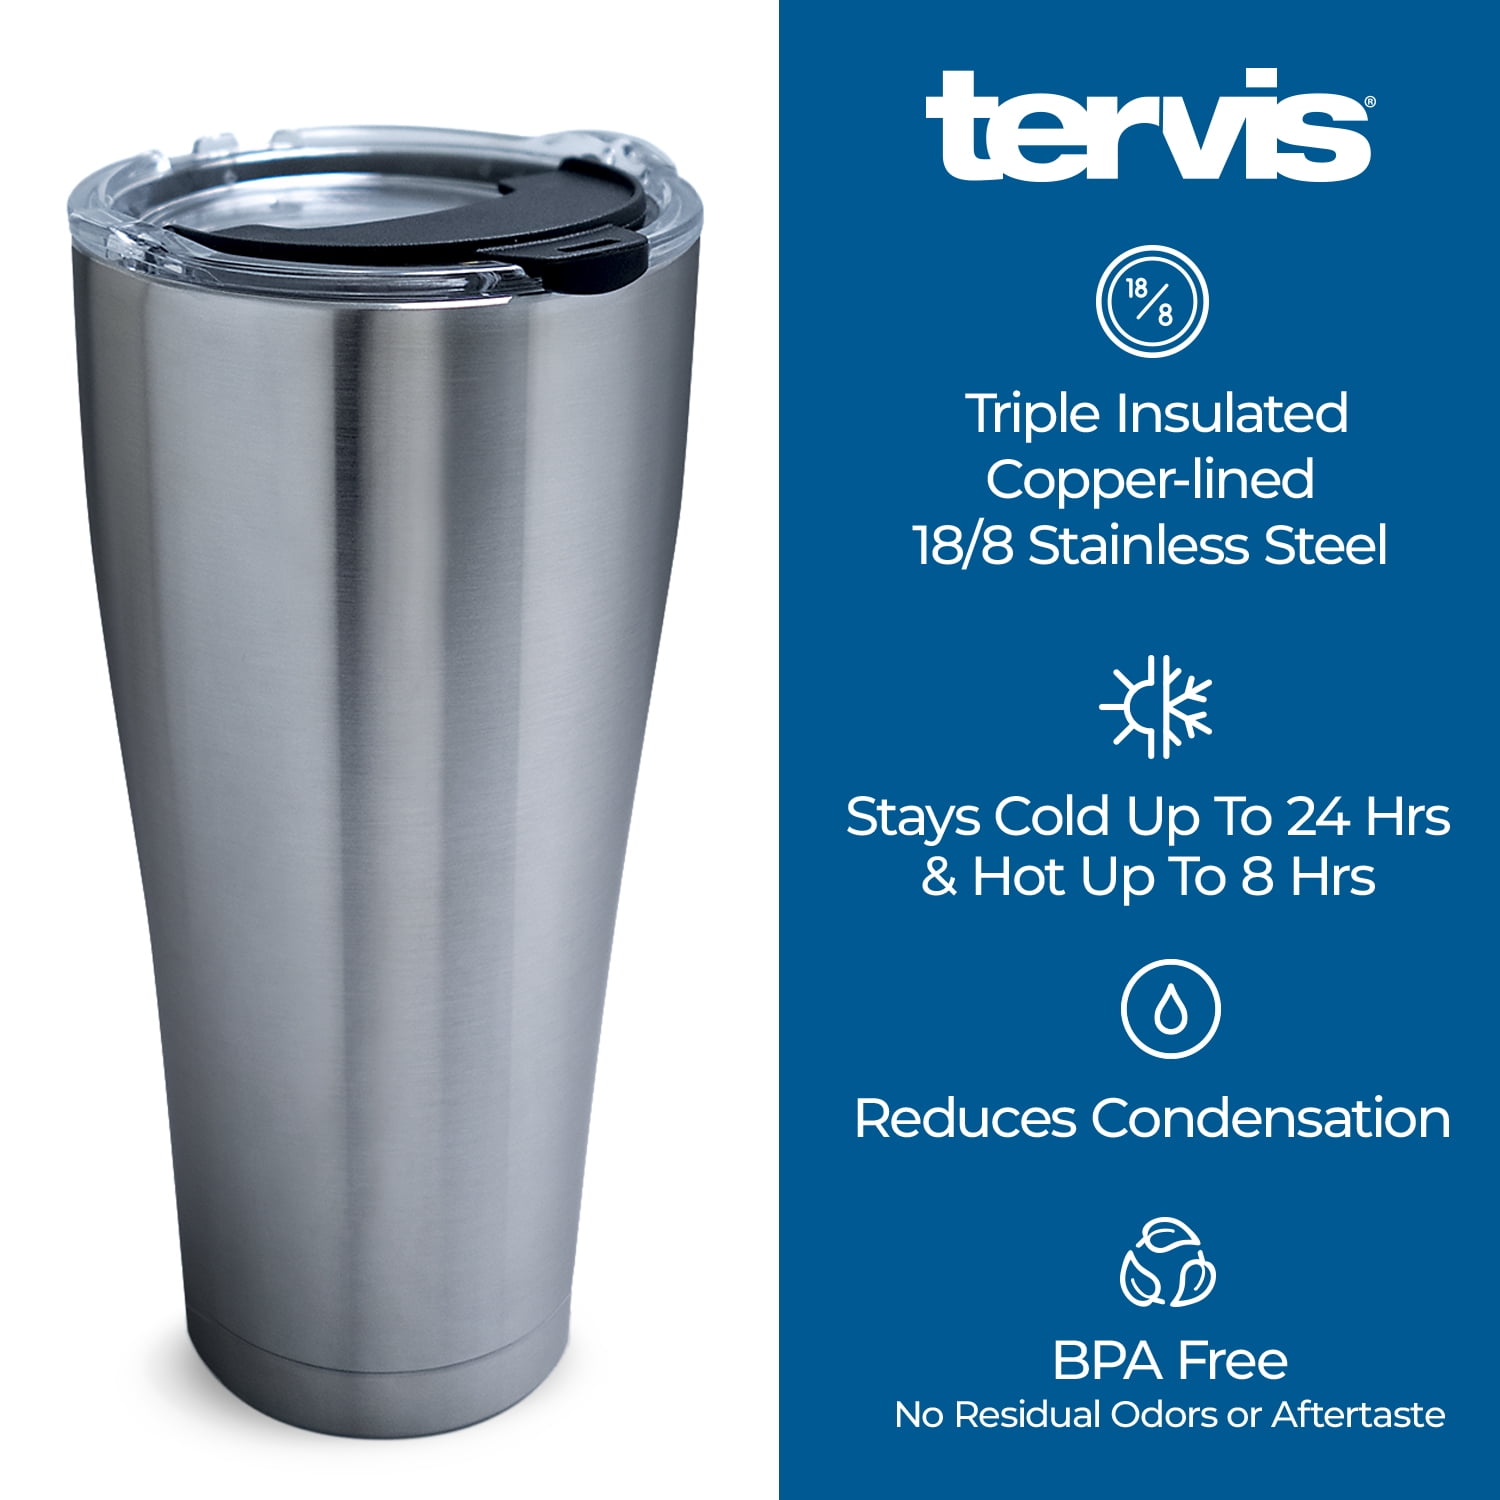 Tervis NFL® San Francisco 49ers Insulated Tumbler 